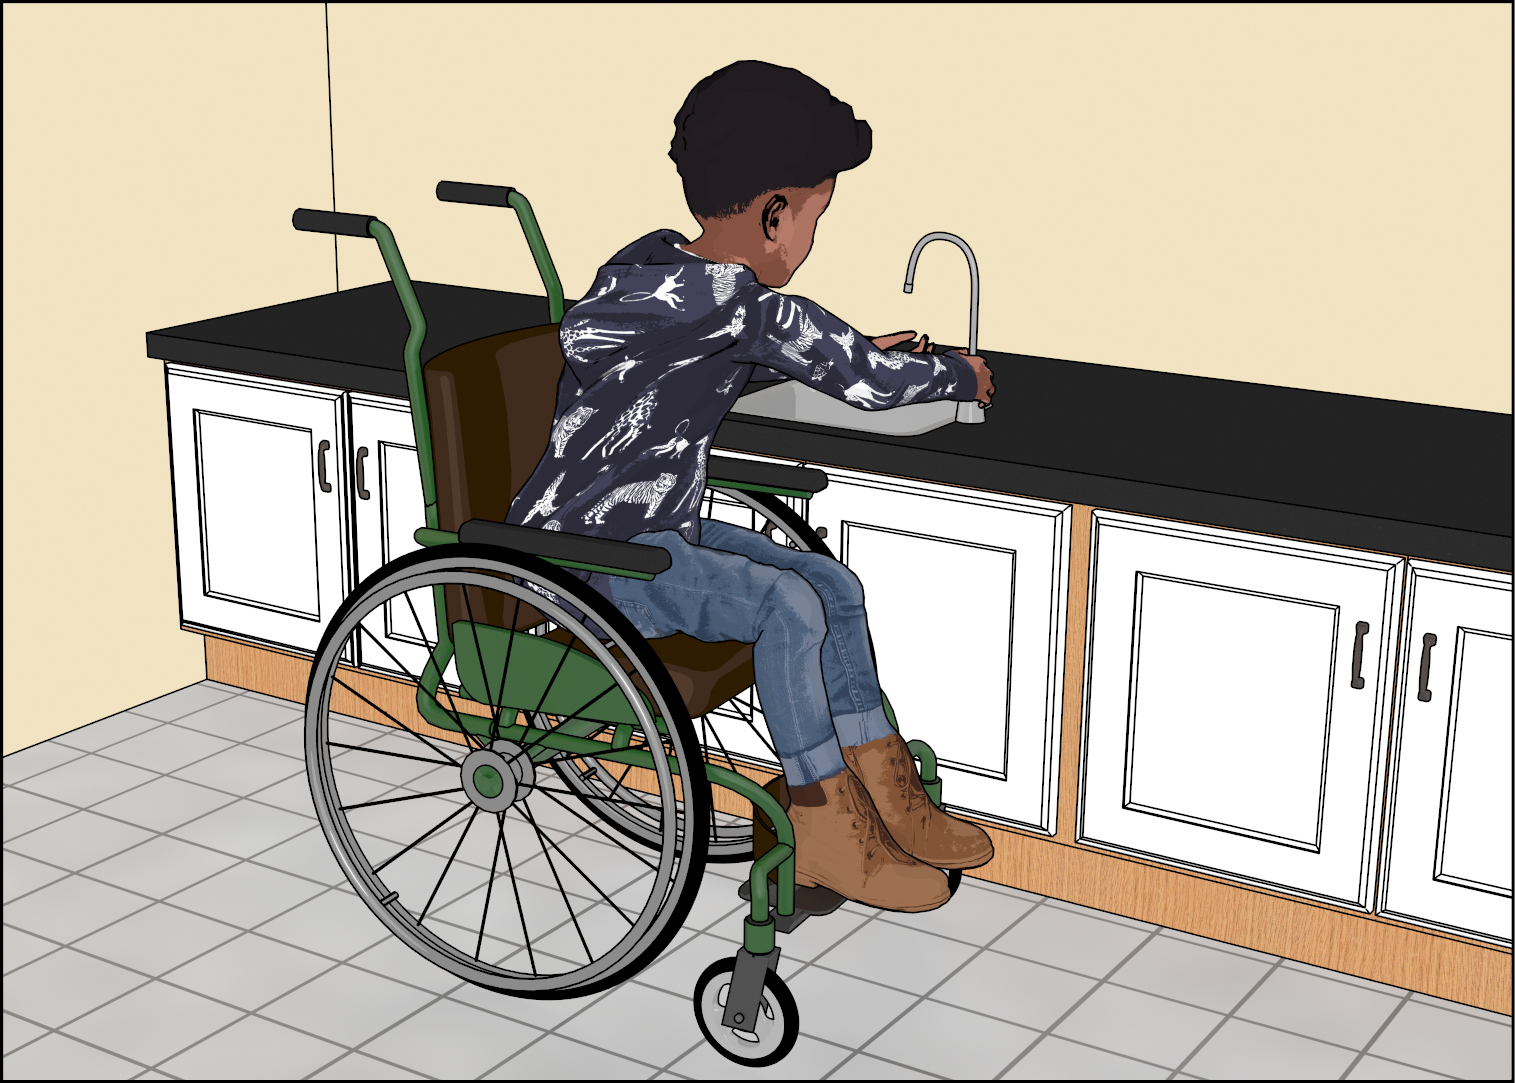 A 5-year-old child using a wheelchair is positioned for a parallel approach to a sink at counter with base cabinetry.